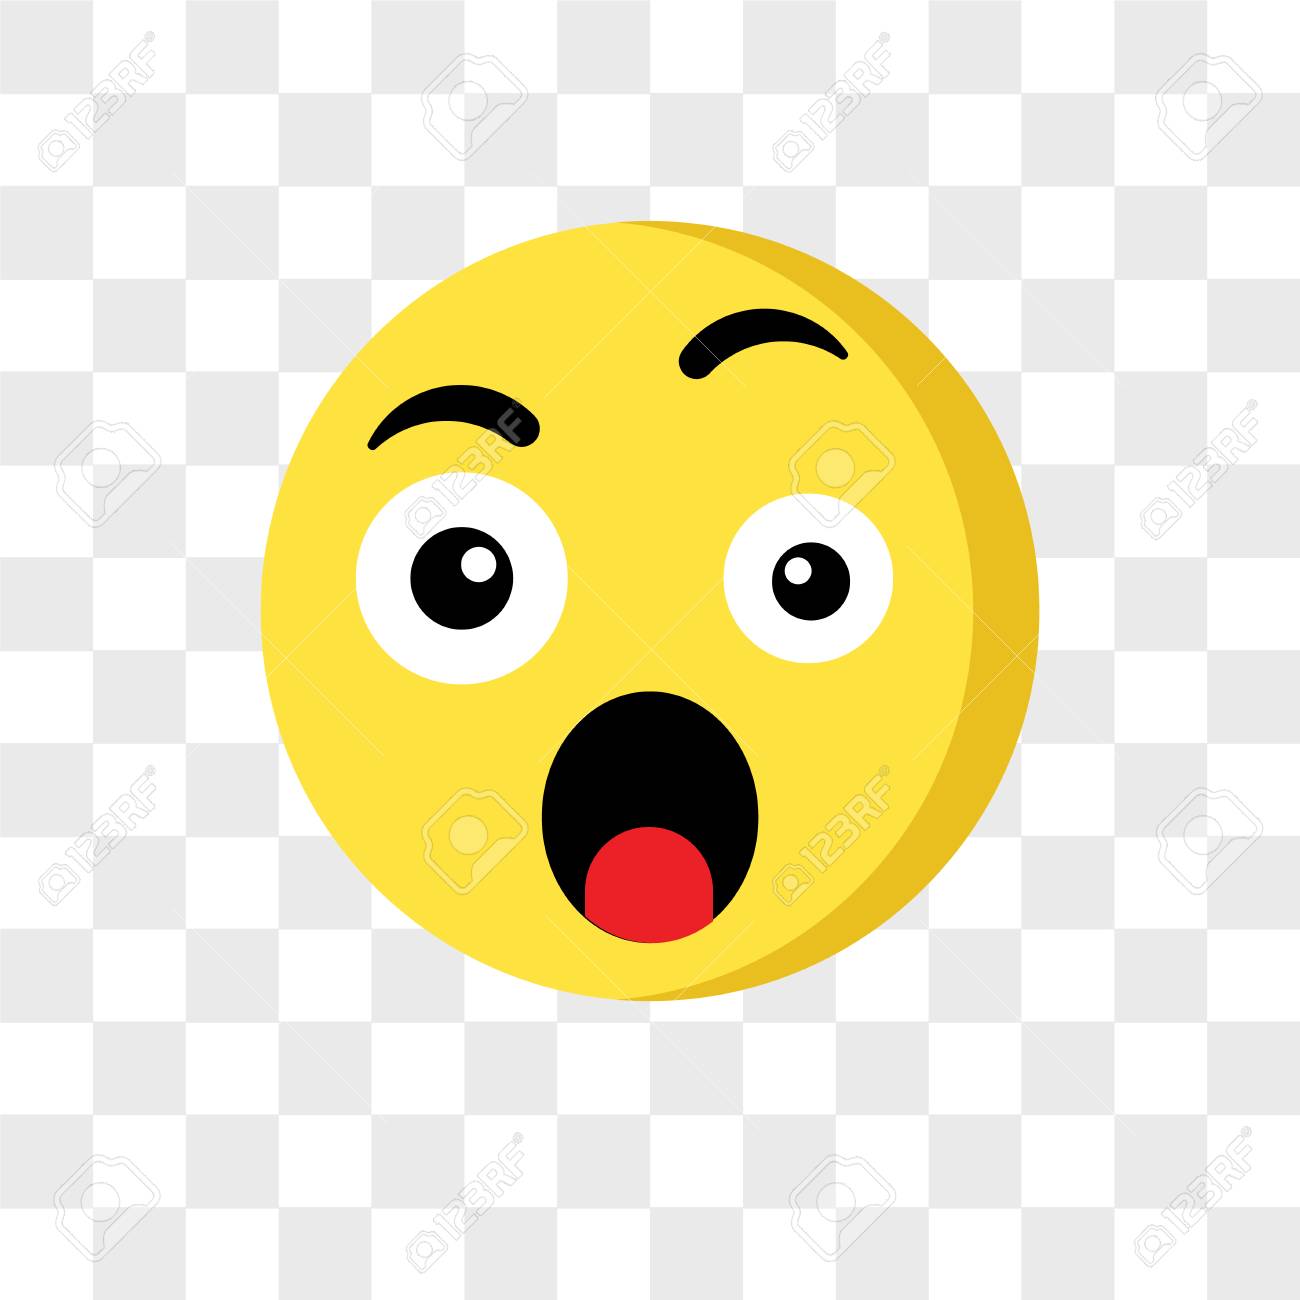 Surprised Emoji Vector Icon Isolated On Transparent Background